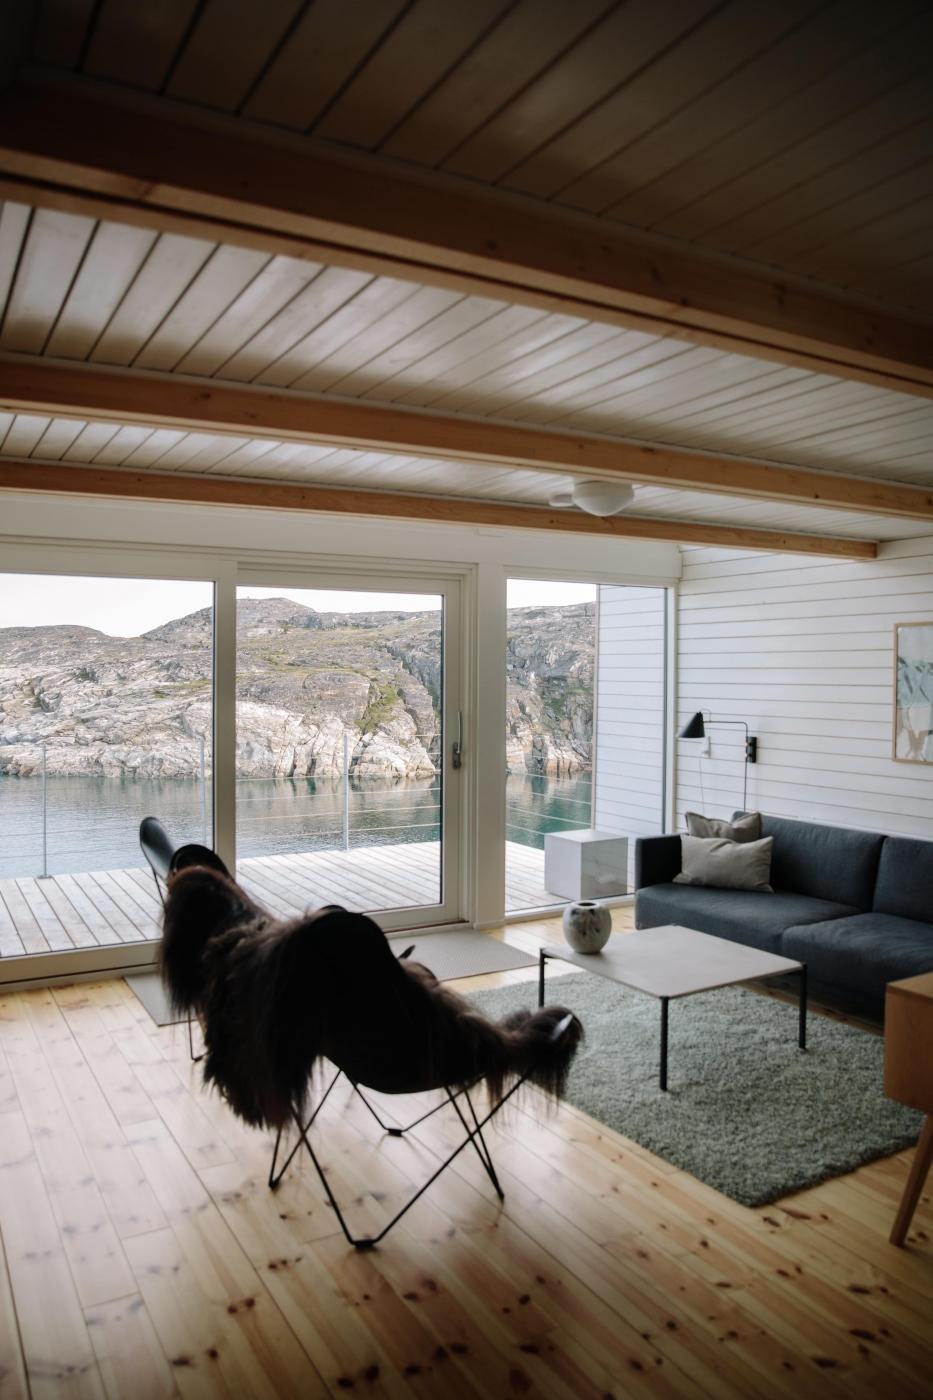 The living room of the hut at Ilimanaq Lodge with ocean views. Photo by Jessie Brinkman Evans